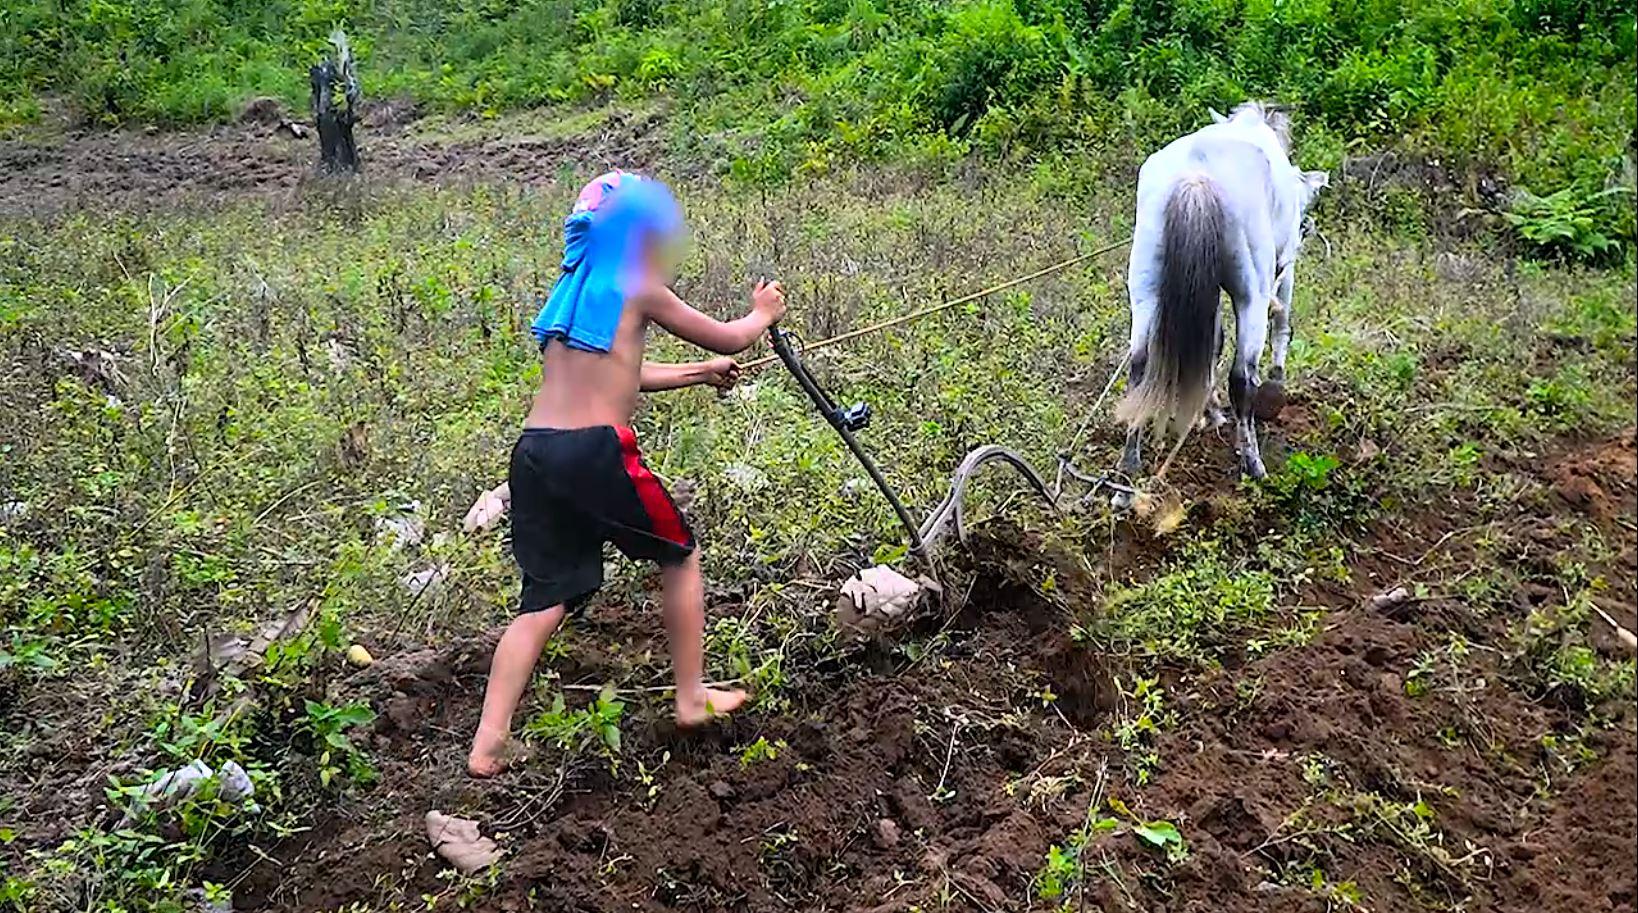 10-year-old boy in Sultan Kudarat plows land with horse to help his family